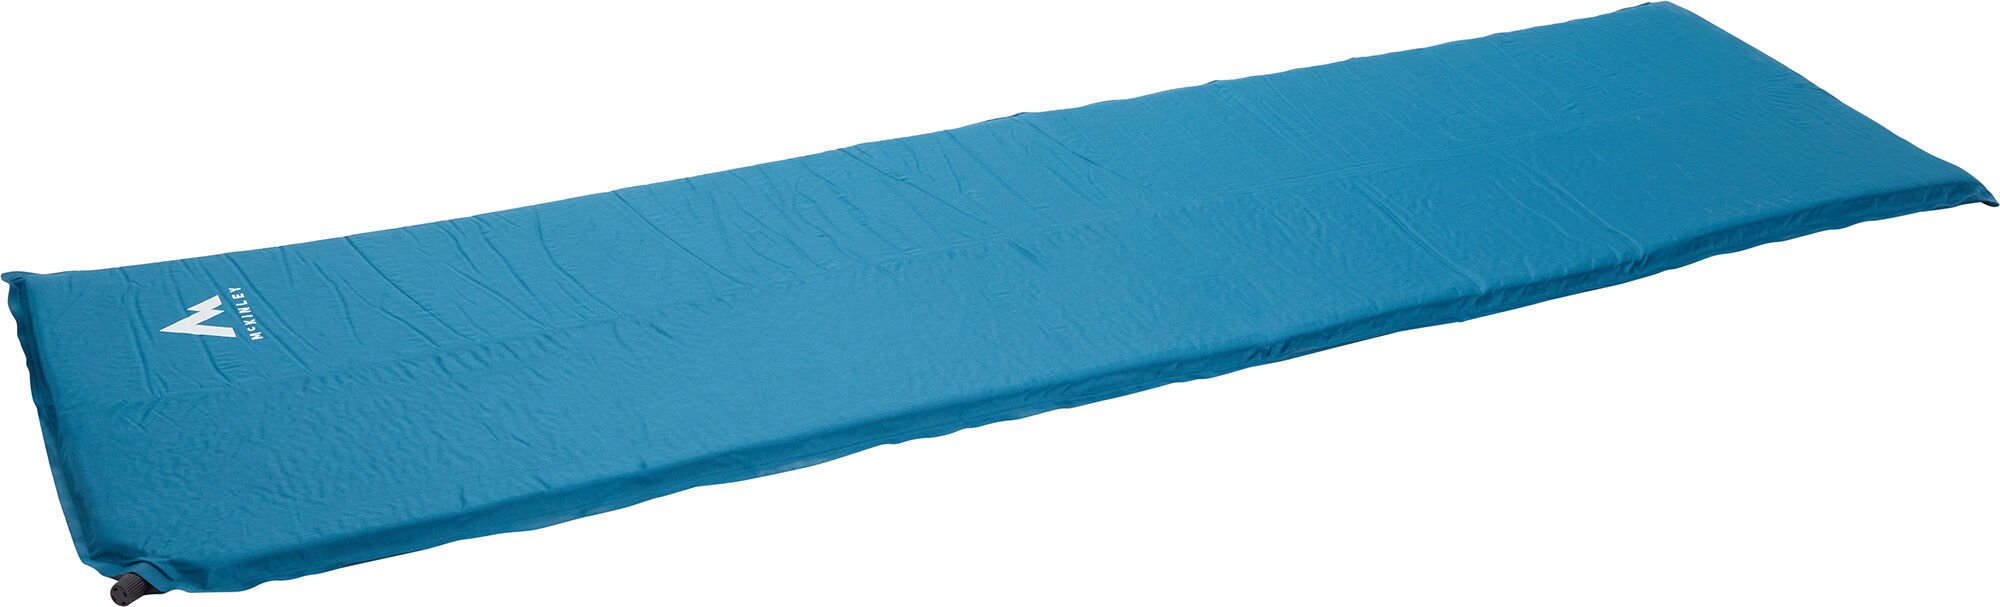 McKinley Trail SI 25 Thermal Mat